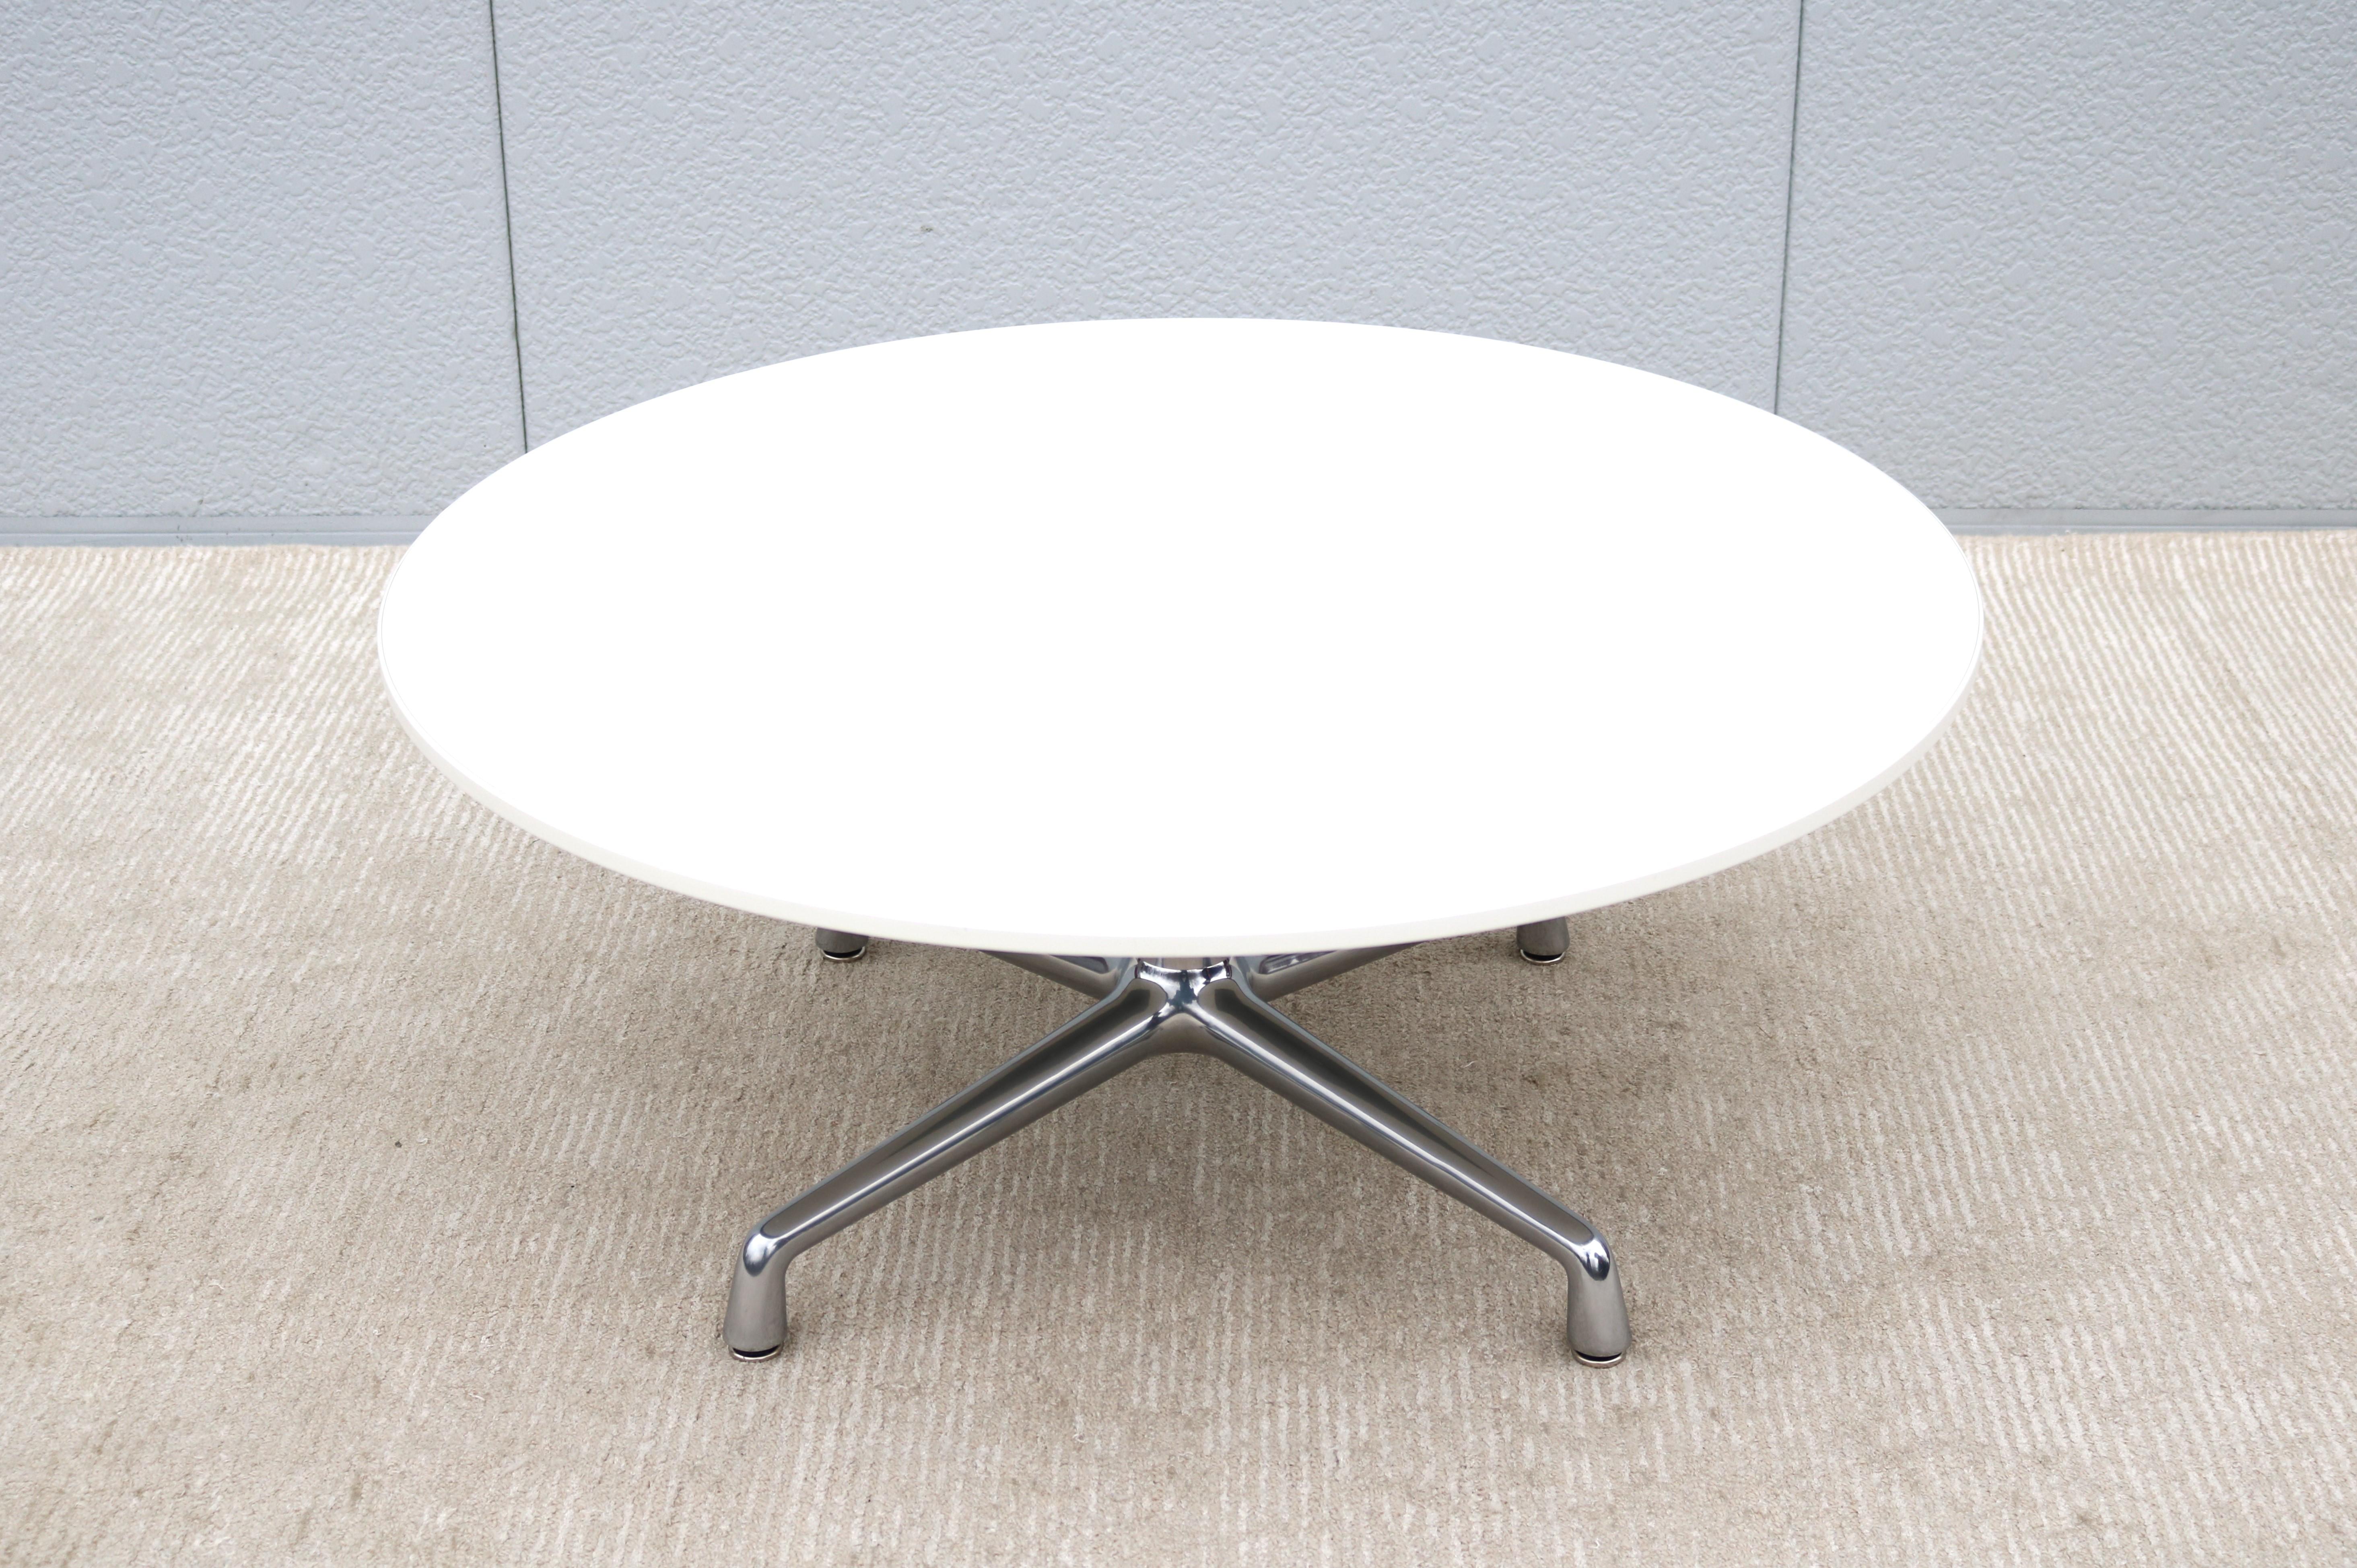 The modern beauty and smart design of the SW_1 table fits seamlessly into any environment and among mid-century classic designs.
This is a masterpiece that is well designed and well-crafted, a combination of efficiency, stability and elegance.
This